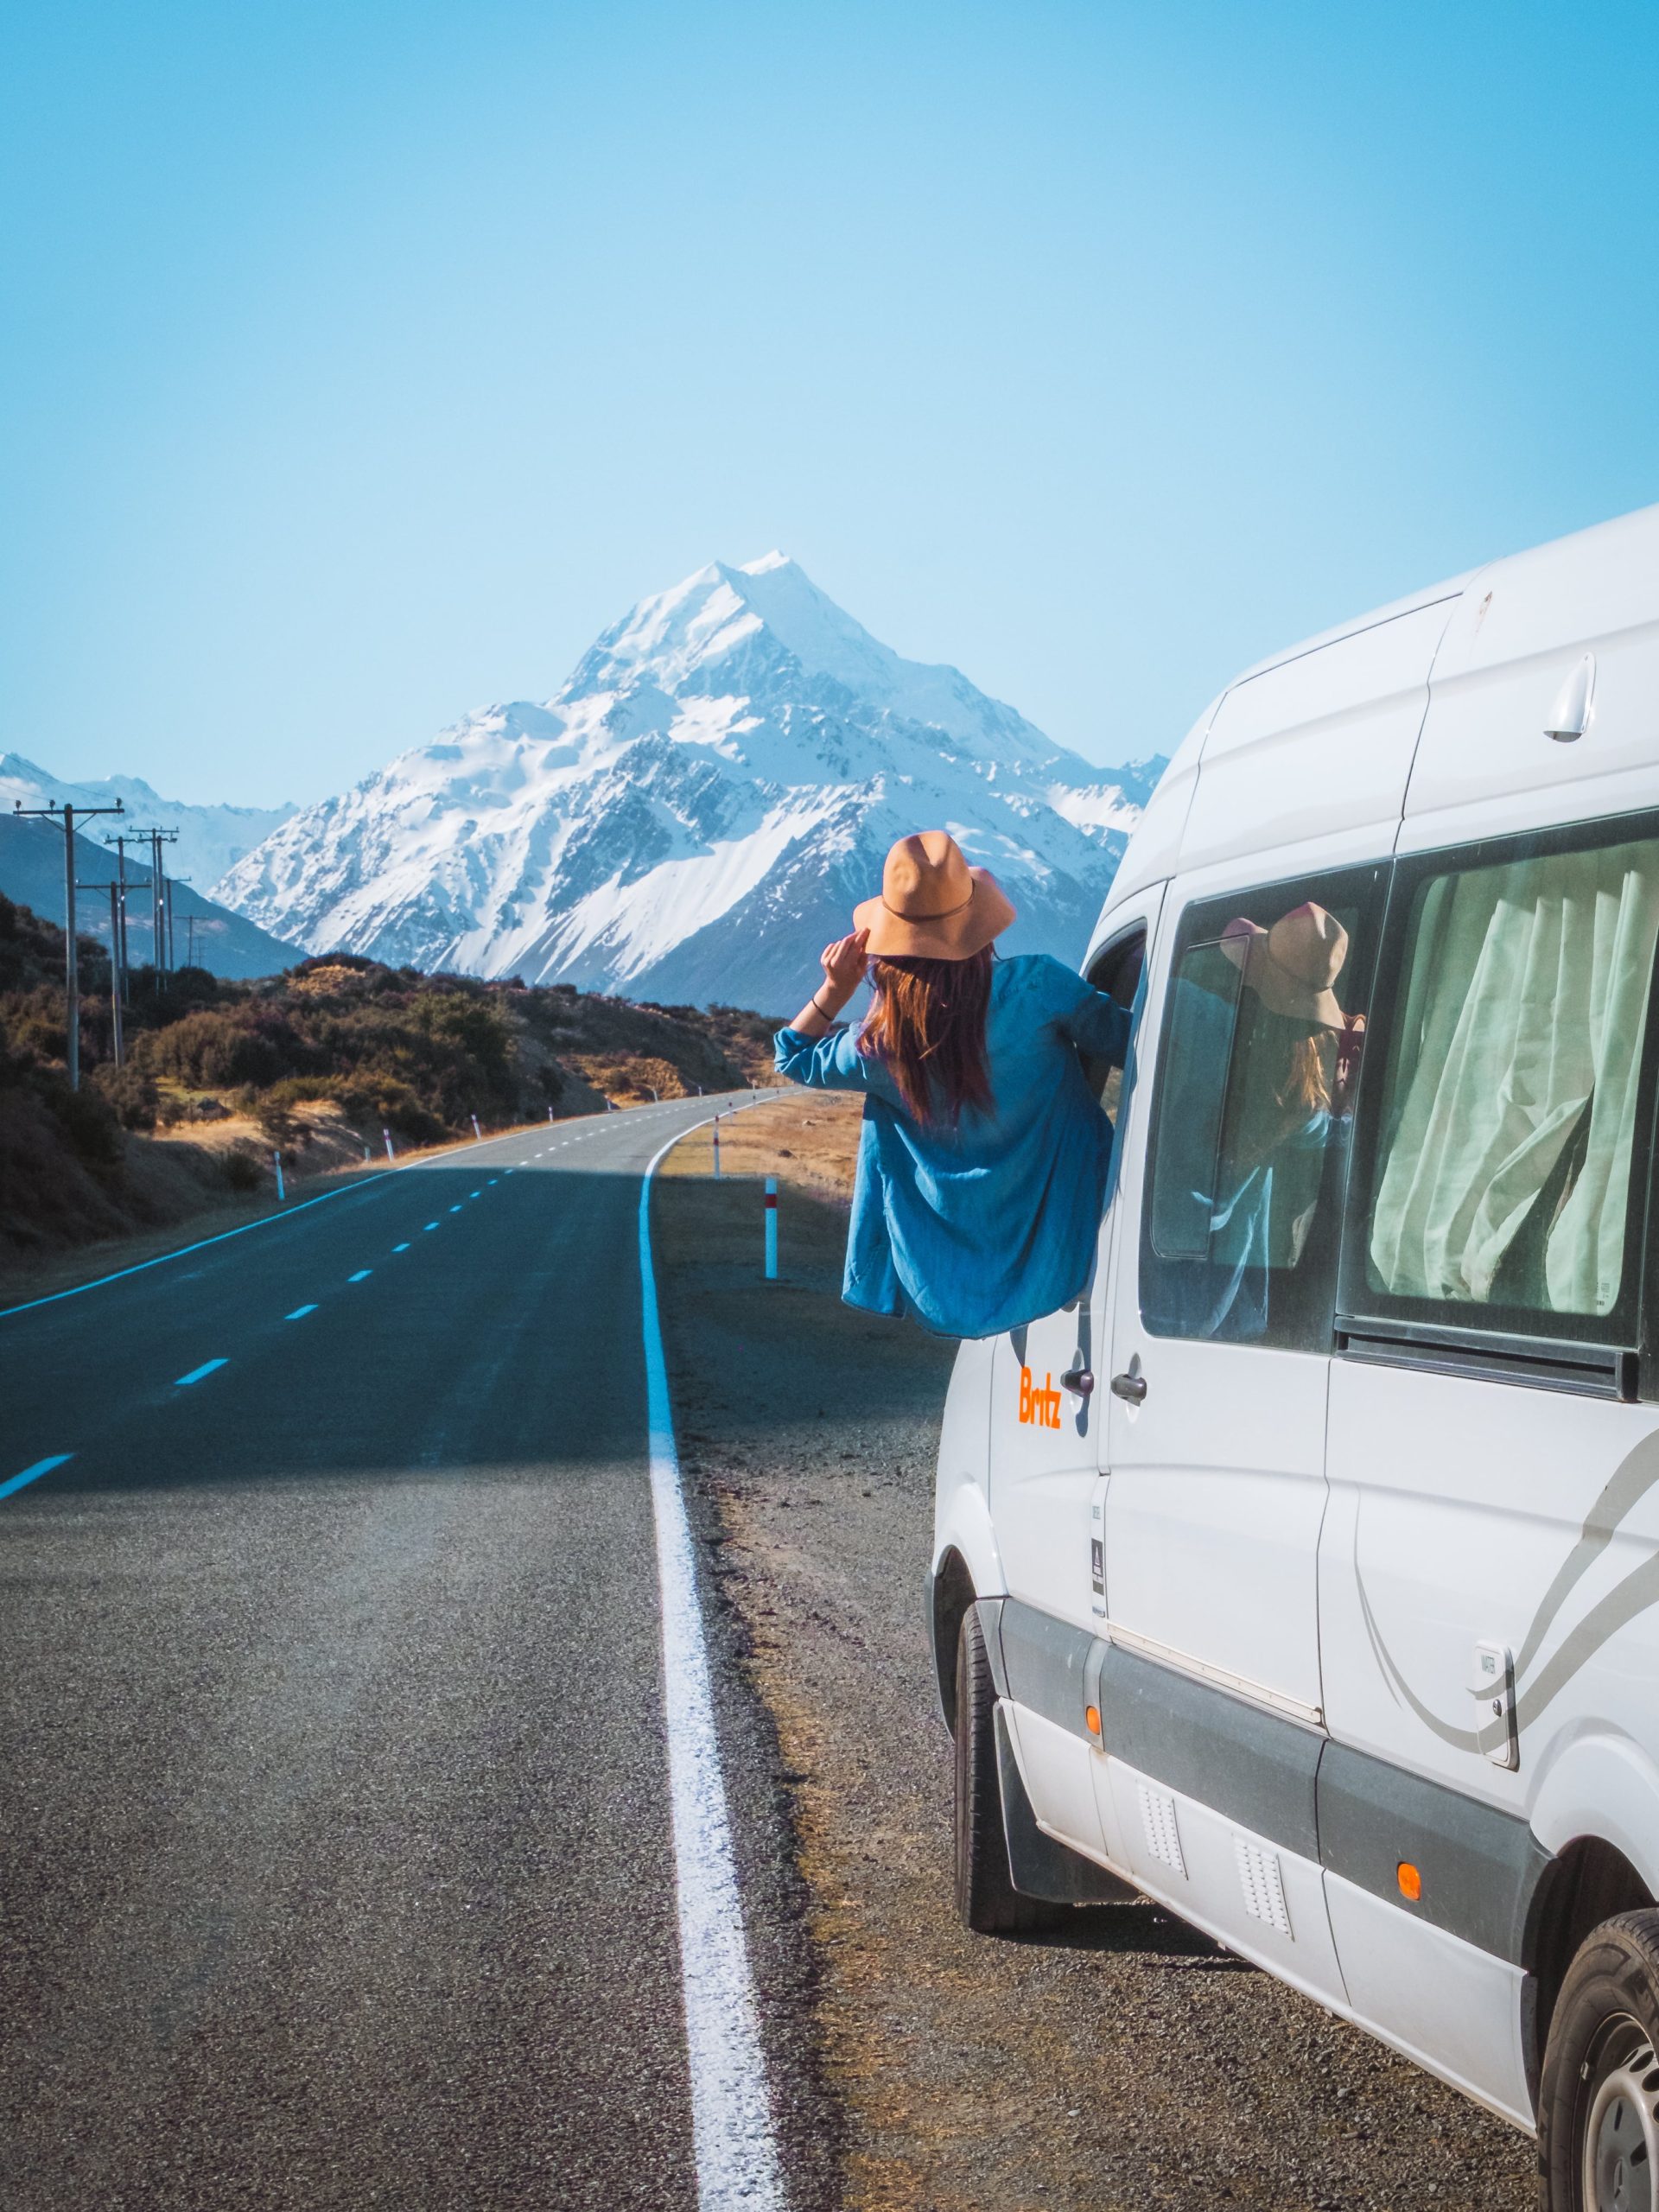 Renting a Britz Campervan to road trip New Zealand is one of the best things to do in New Zealand